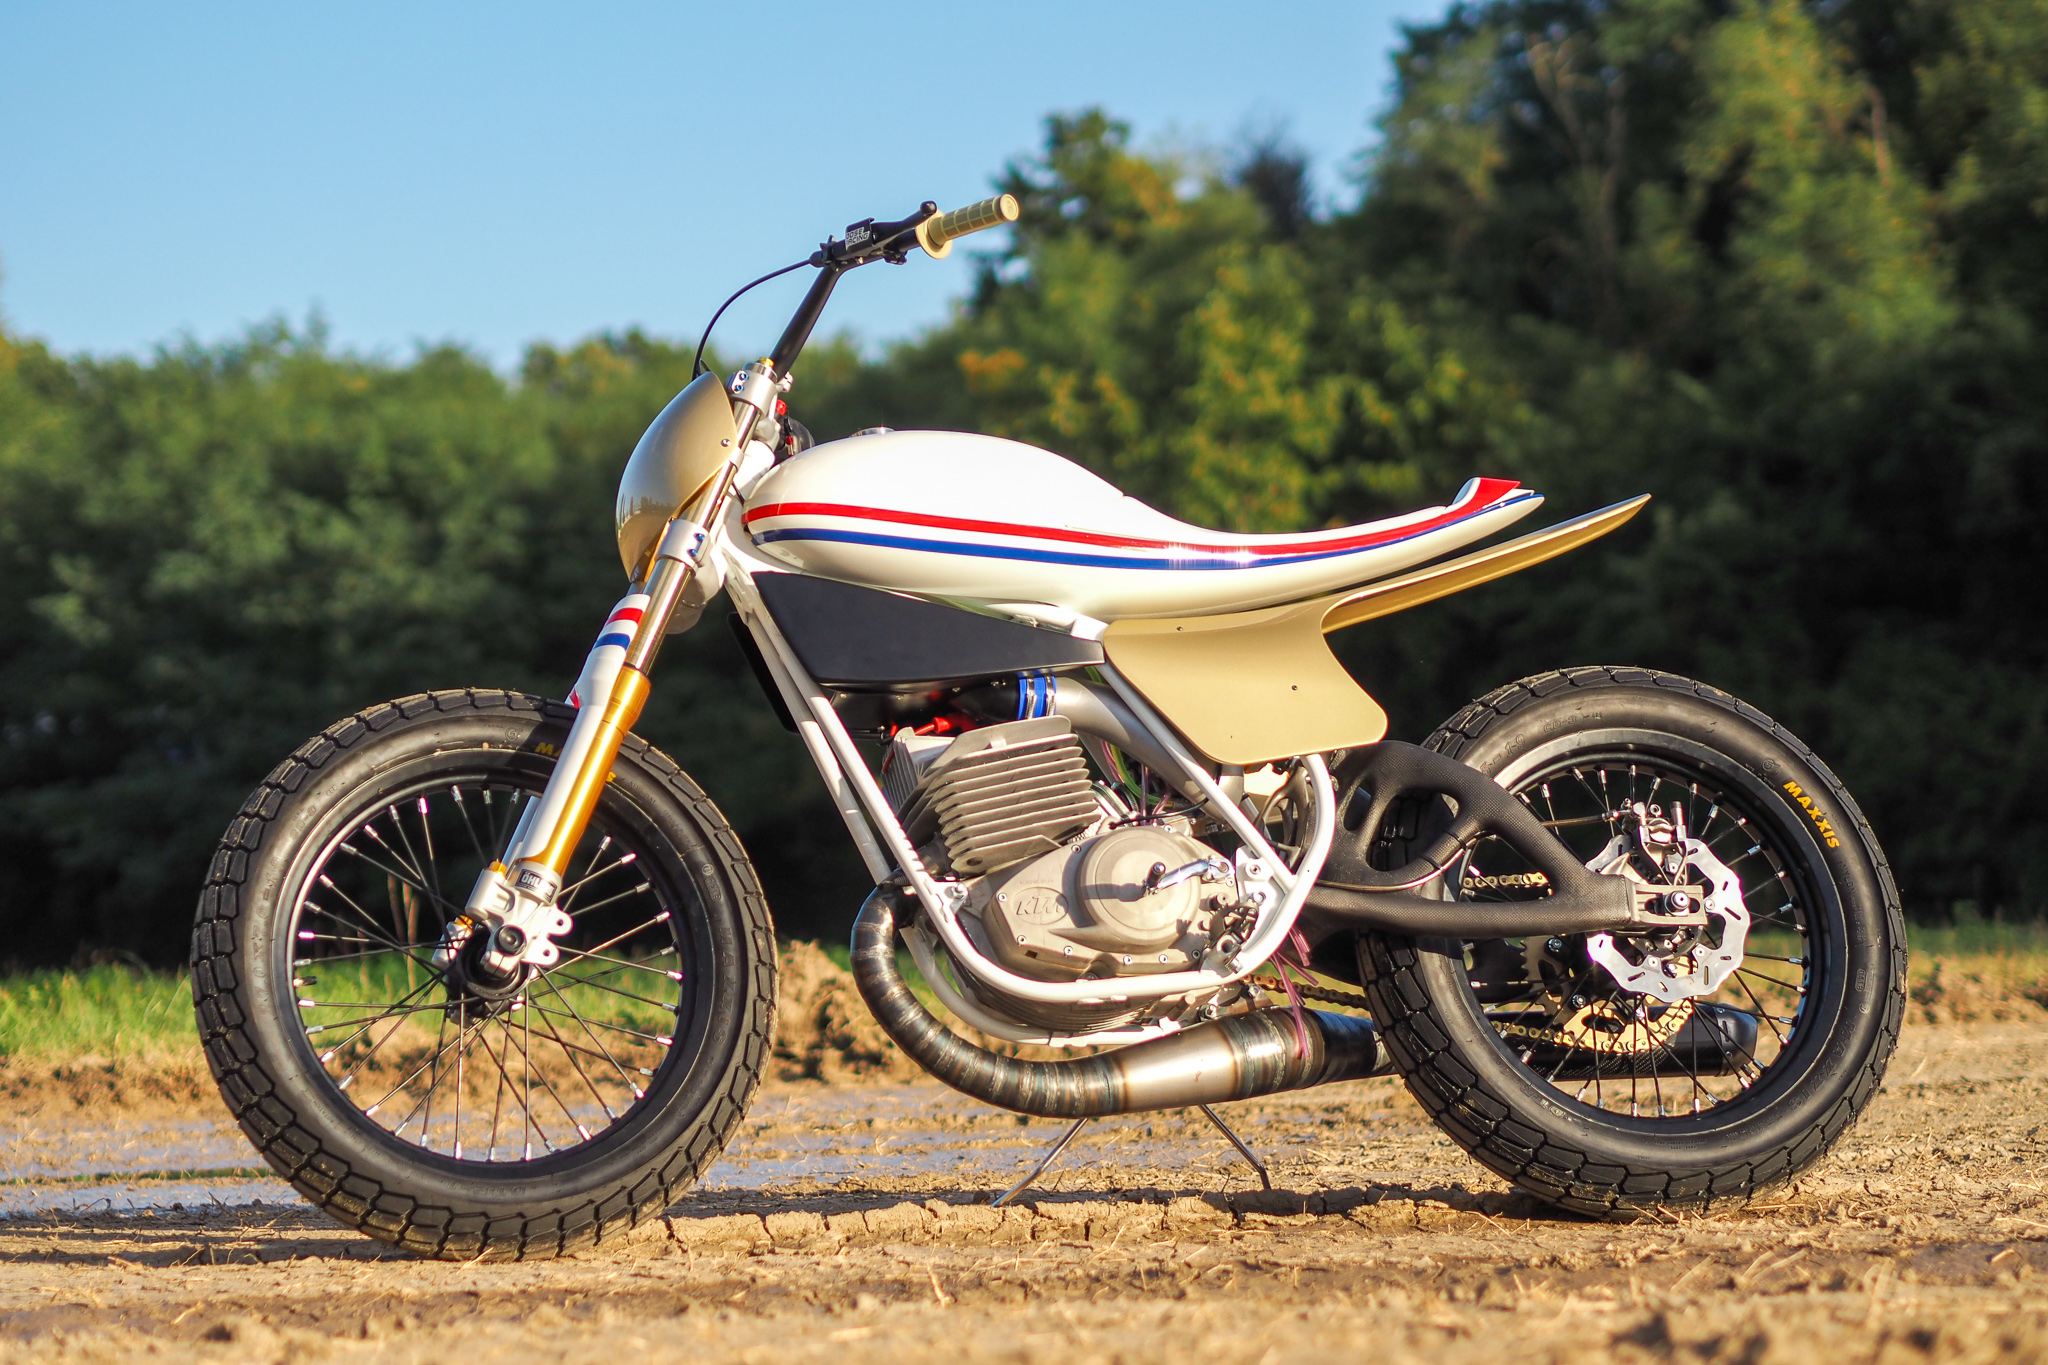 The motorbike is based on the classic KTM 250GS design.